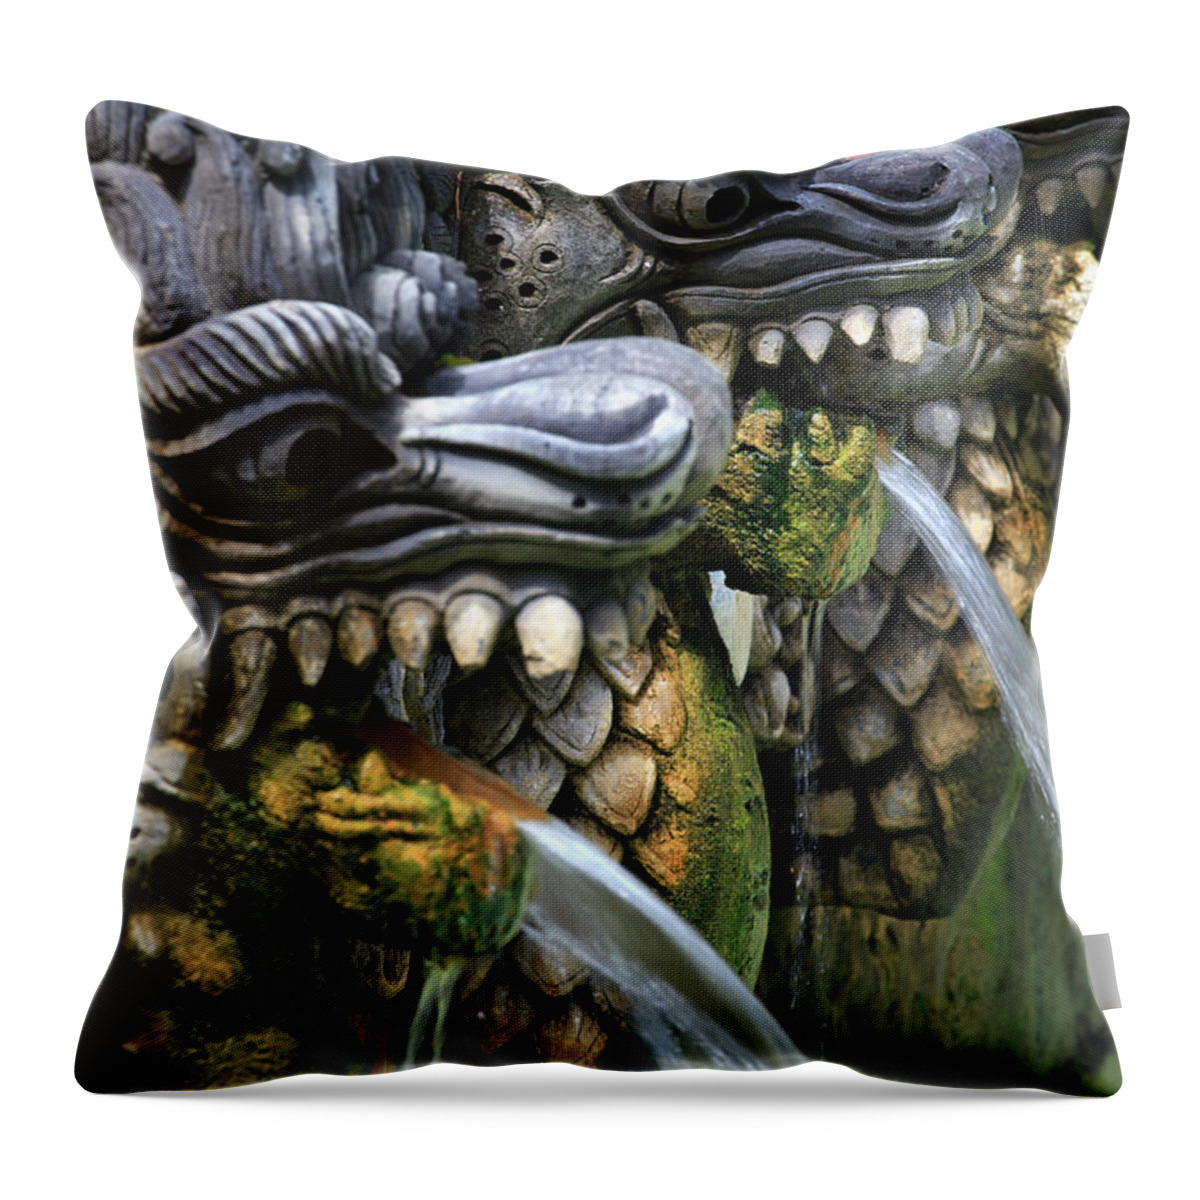 Art Throw Pillow featuring the photograph Indonesia, Bali, Rice Fields And #4 by Michele Falzone